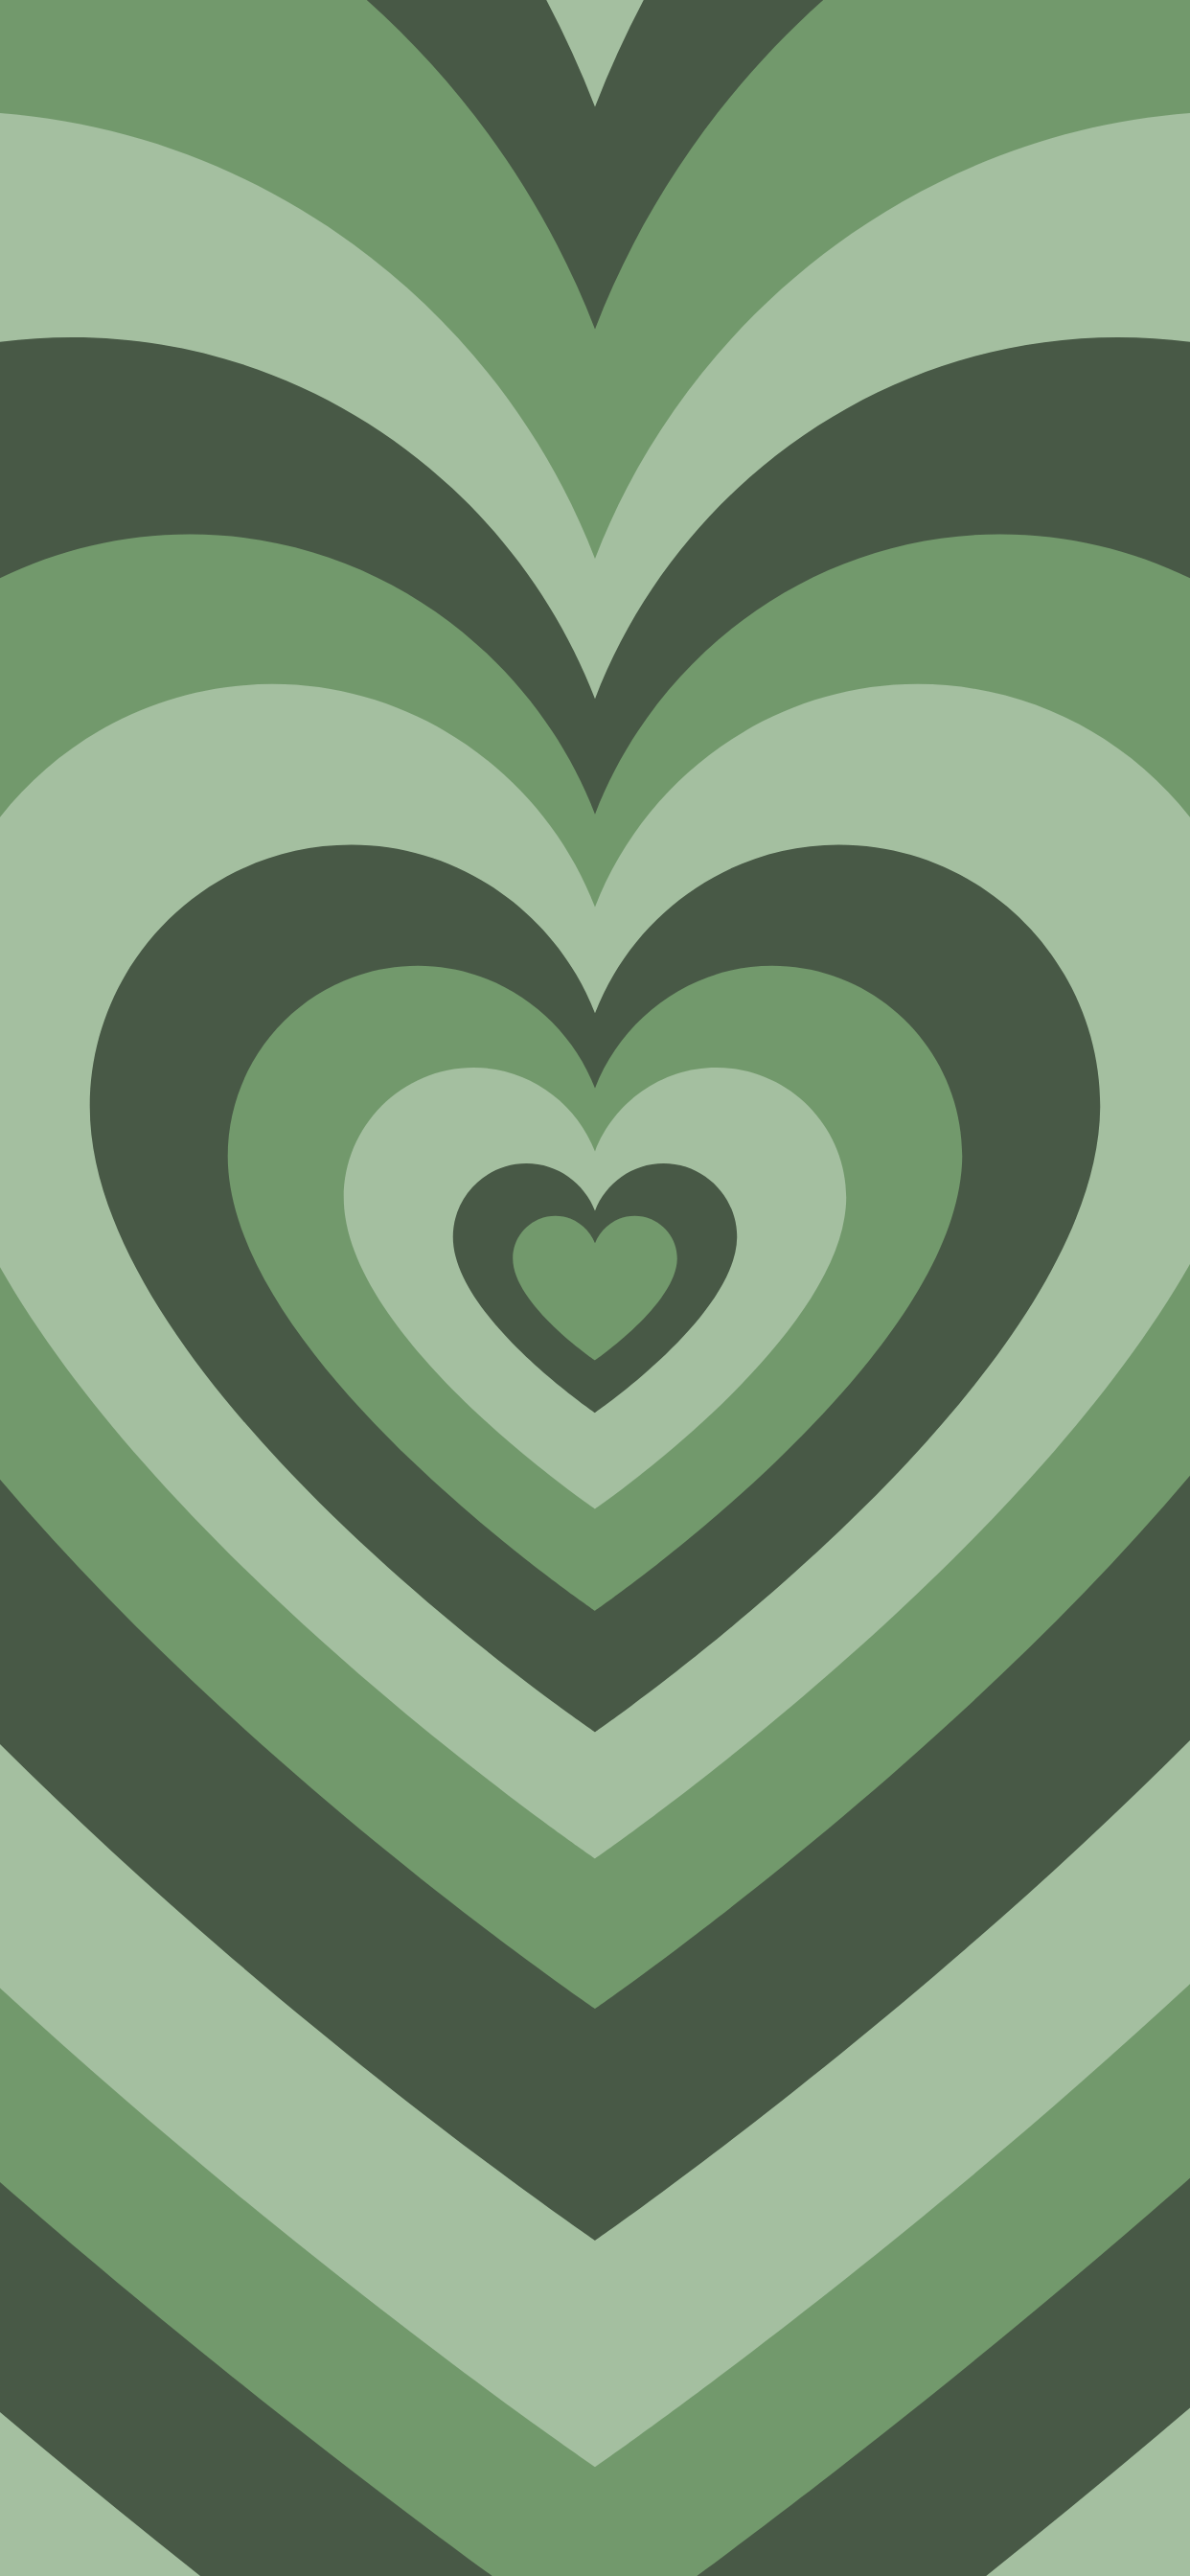 A green heart shaped pattern with lines - Heart